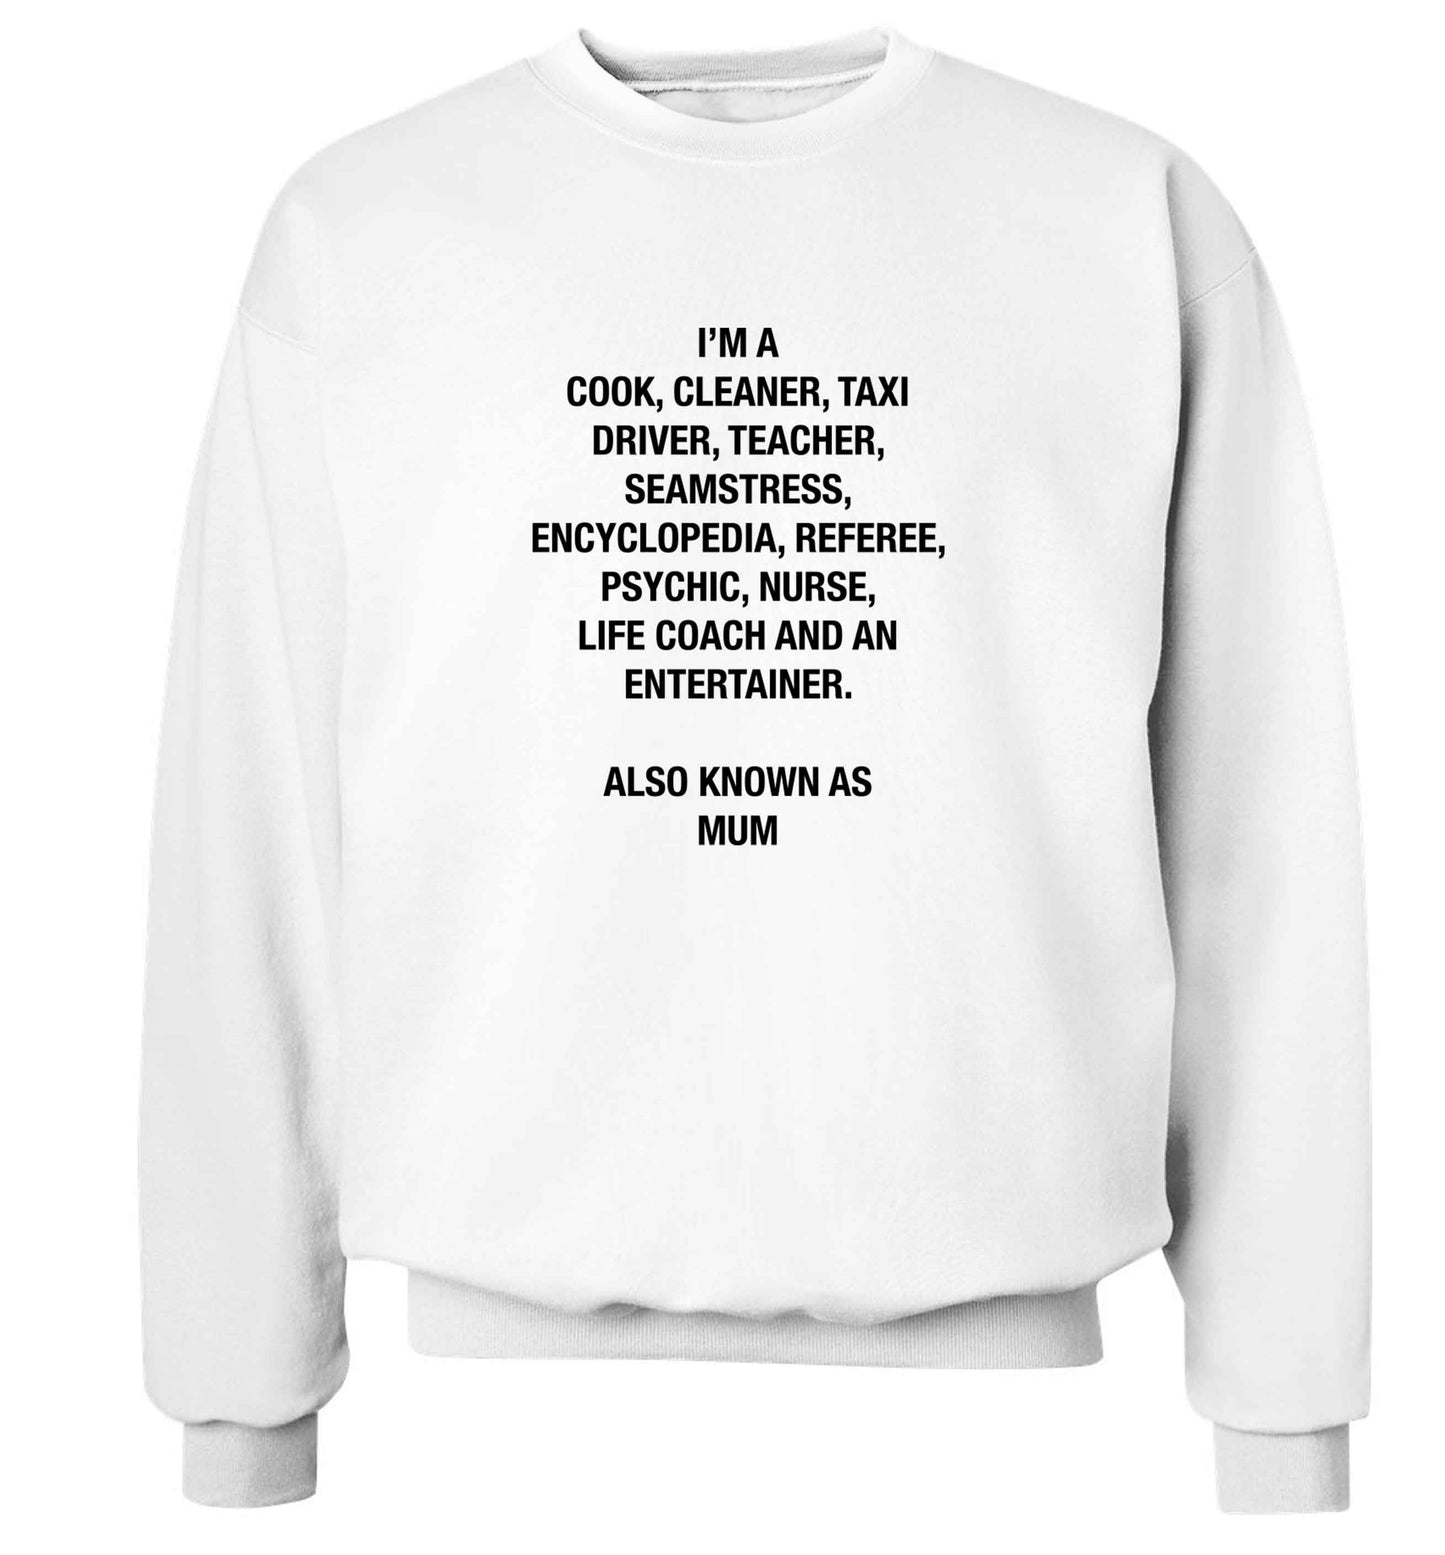 Funny gifts for your mum on mother's dayor her birthday! Mum, cook, cleaner, taxi driver, teacher, seamstress, encyclopedia, referee, psychic, nurse, life coach and entertainer adult's unisex white sweater 2XL